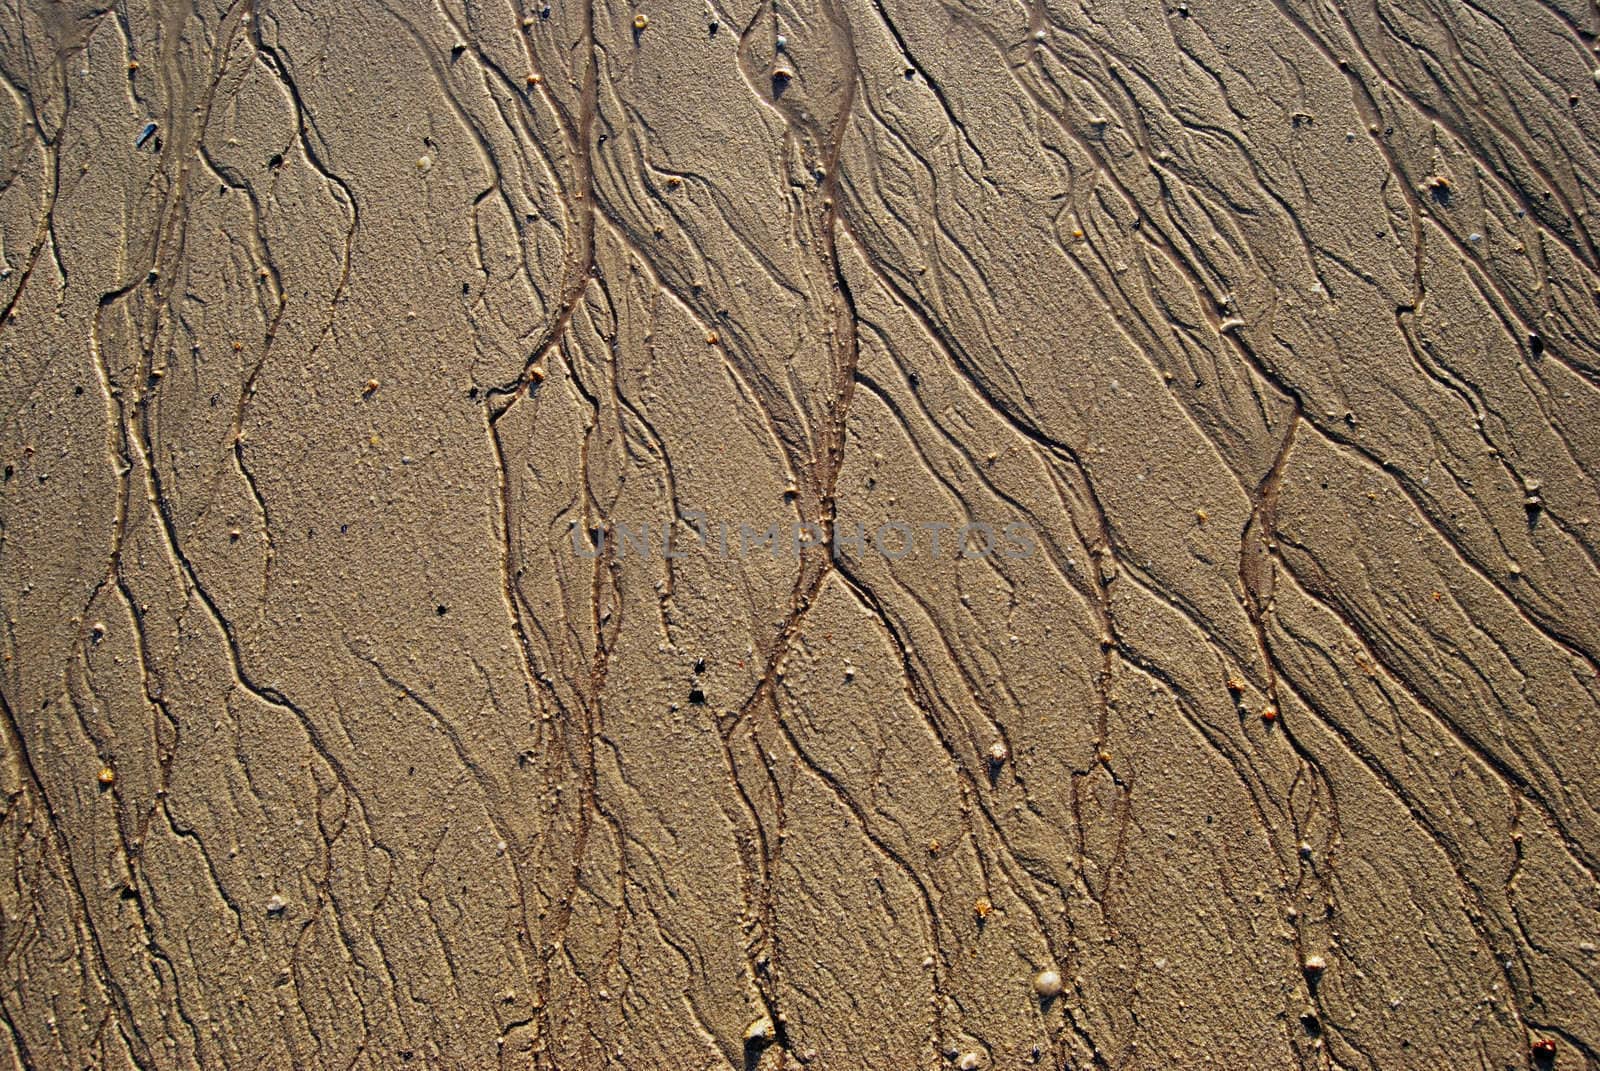 traces of the ocean water leaving patterns in the sand